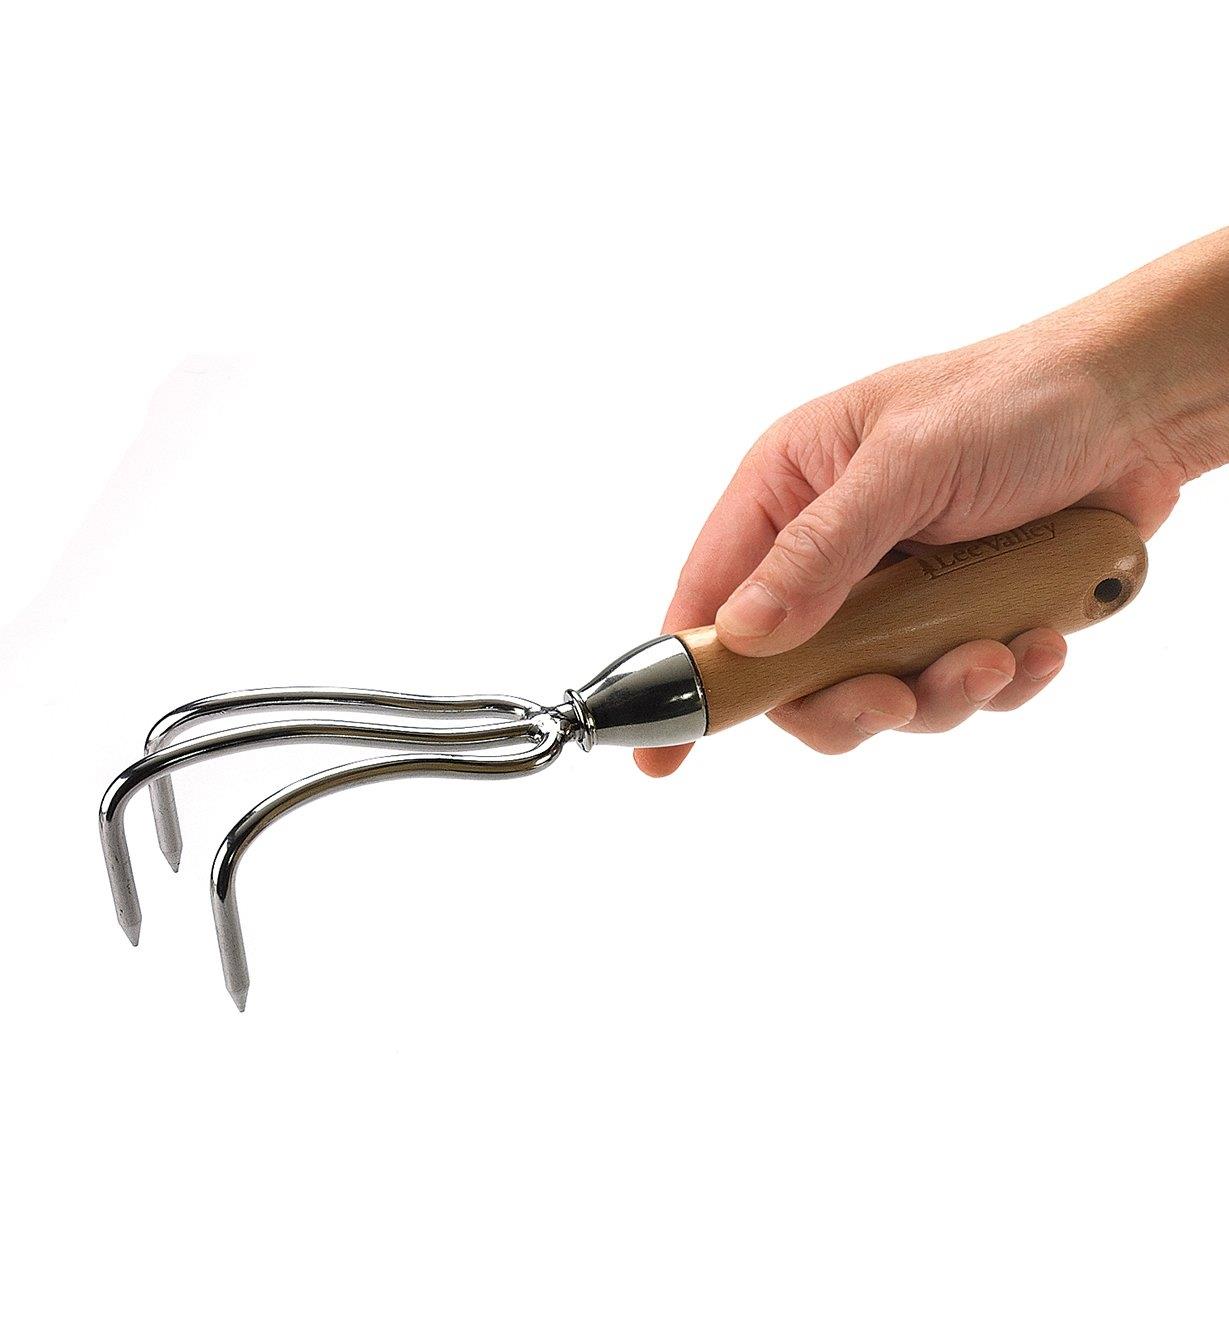 Lee Valley Premium 3-Prong Cultivator held in a hand